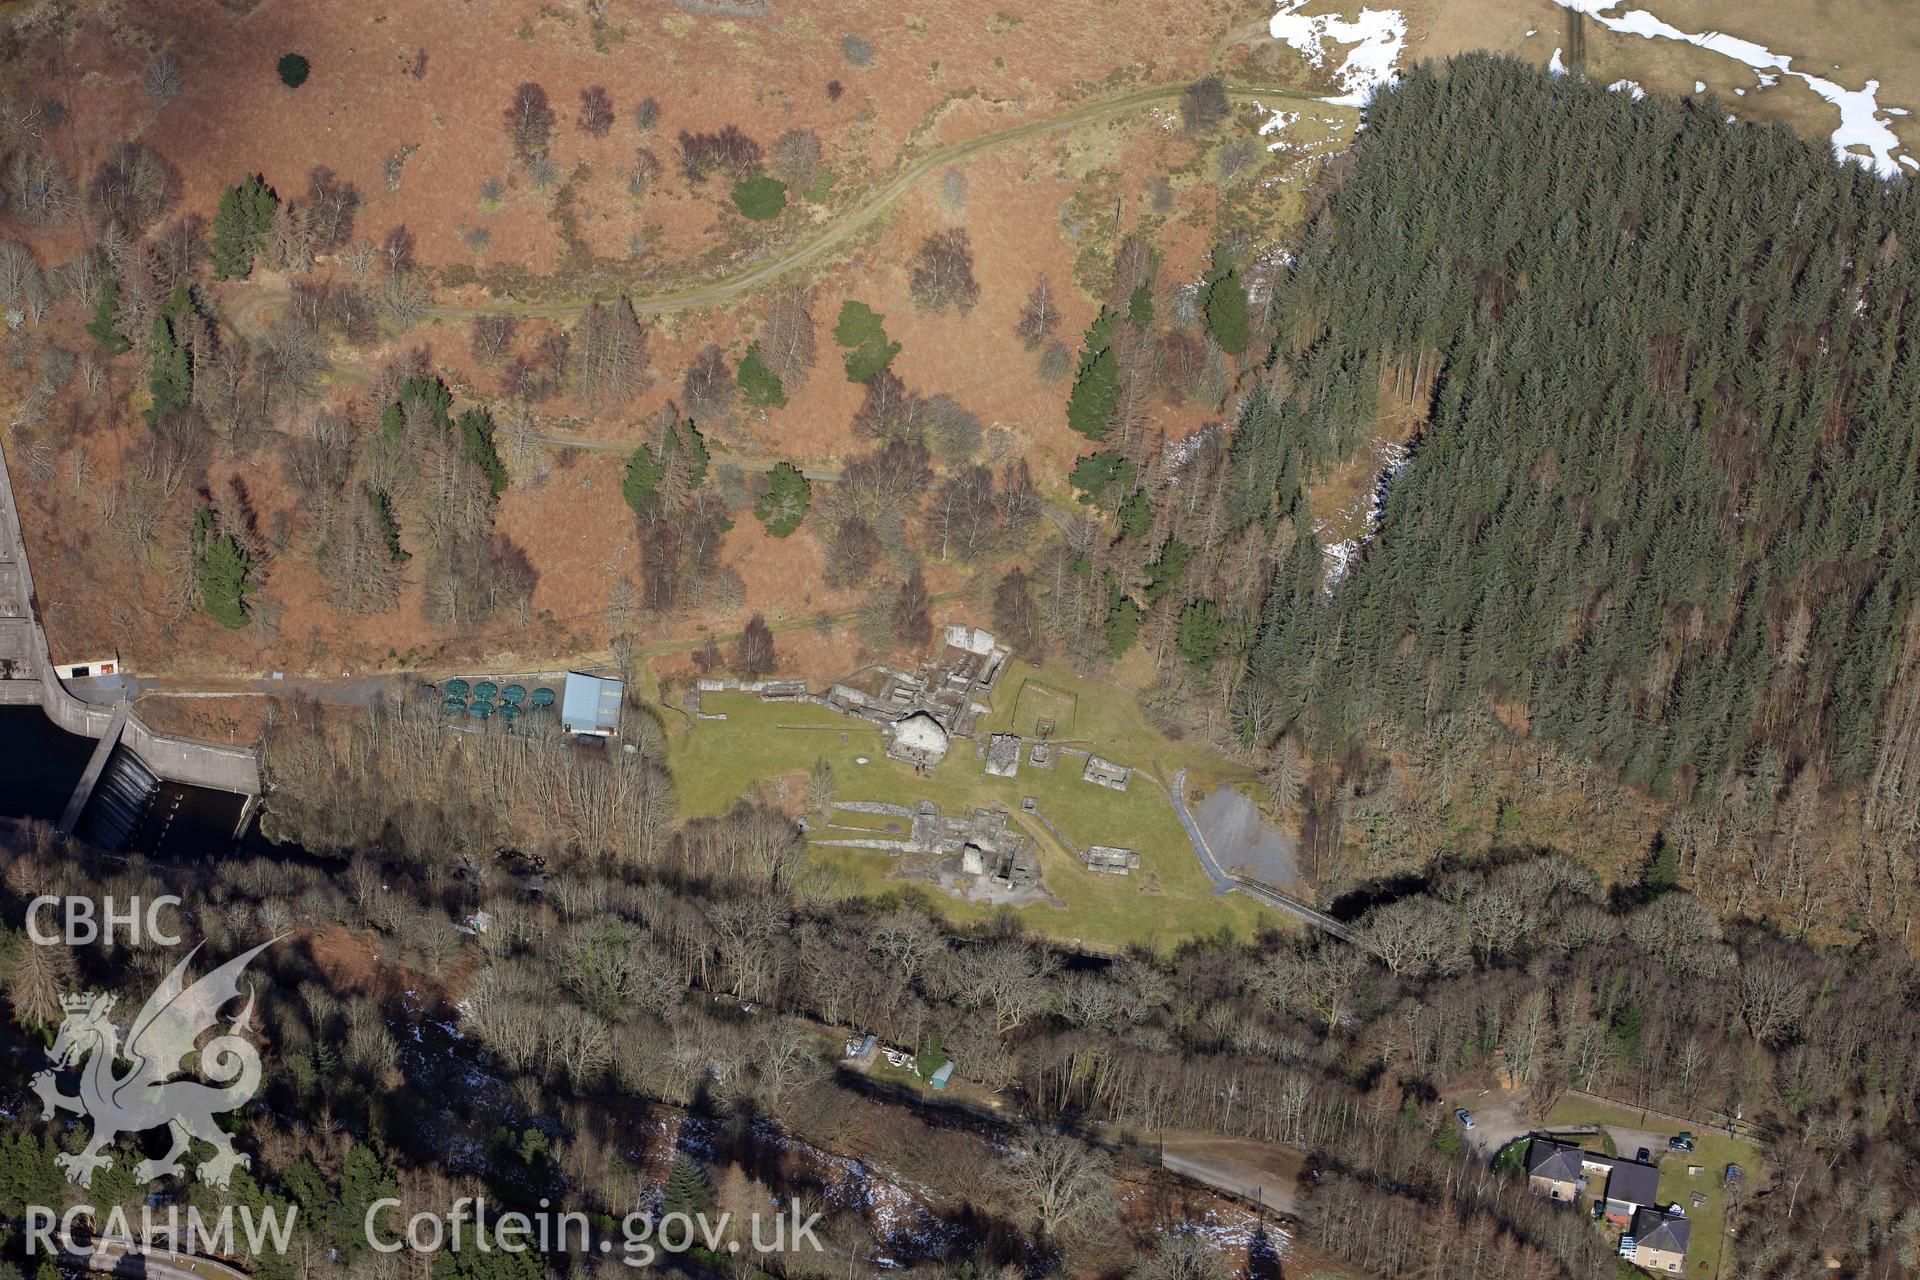 Bryntail lead mine, north west of Llanidloes. Oblique aerial photograph taken during the Royal Commission's programme of archaeological aerial reconnaissance by Toby Driver on 2nd April 2013.